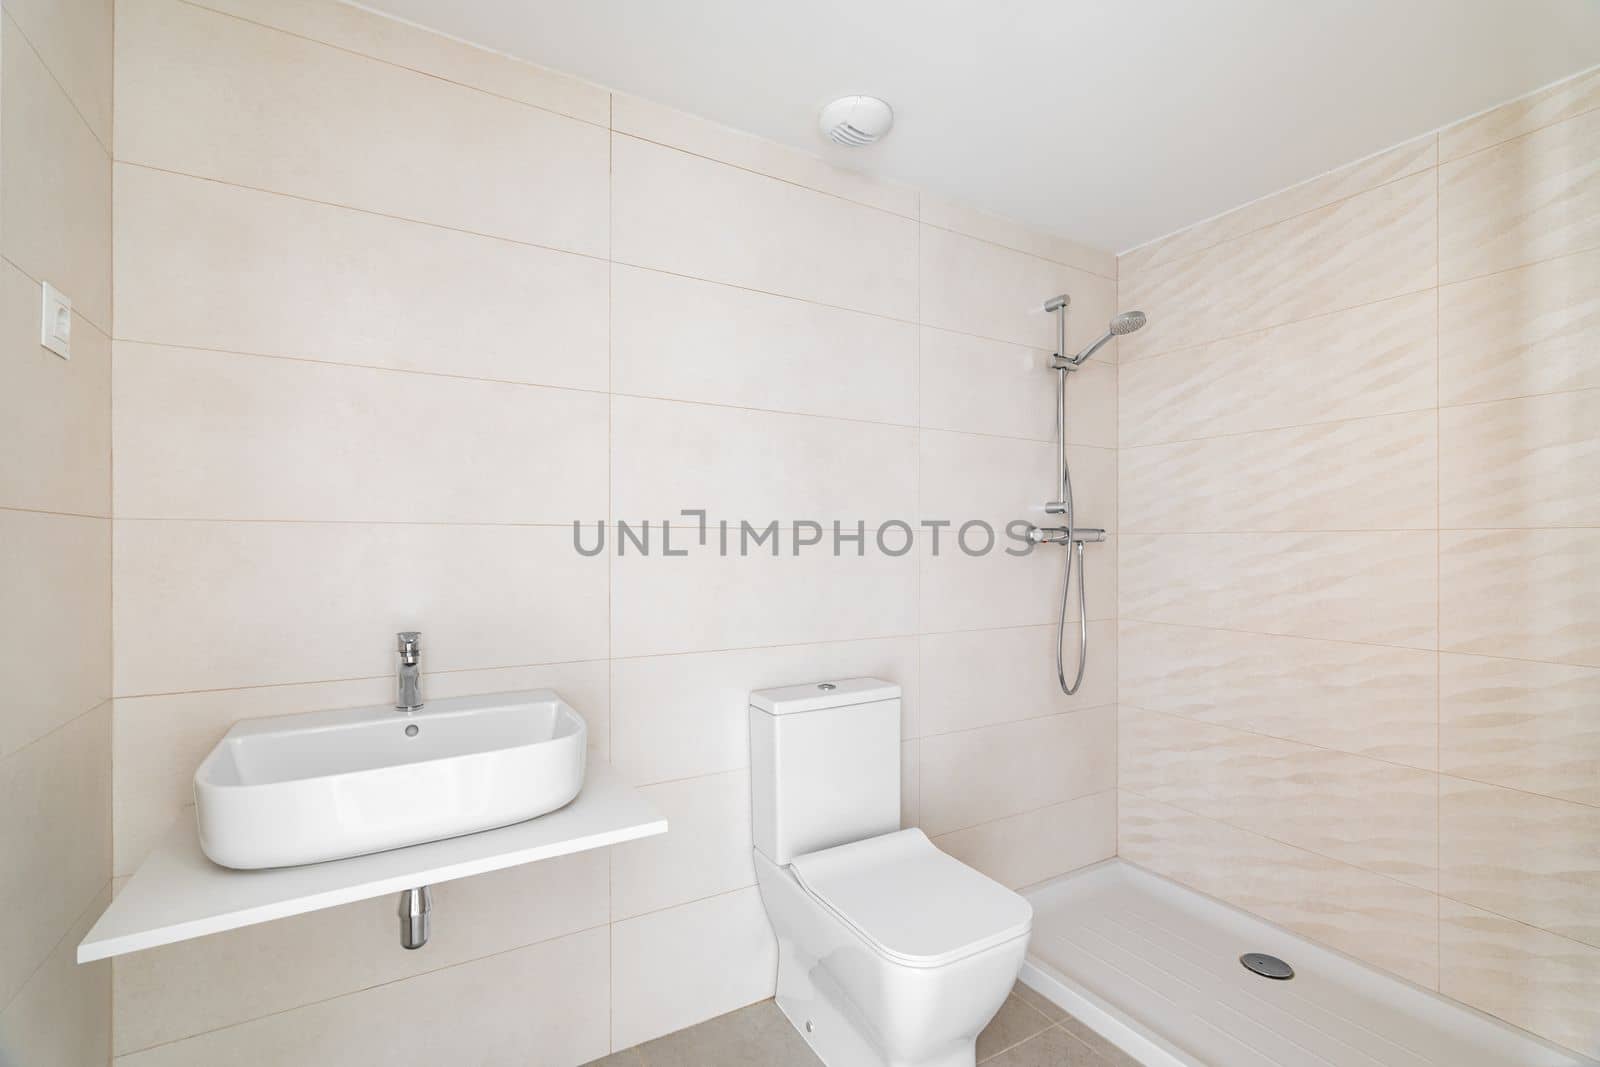 Modern bathroom in white beige tones tile with vanity sink and an open shower in hotel or new apartment. Concept of stylish bathroom interiors with natural light.